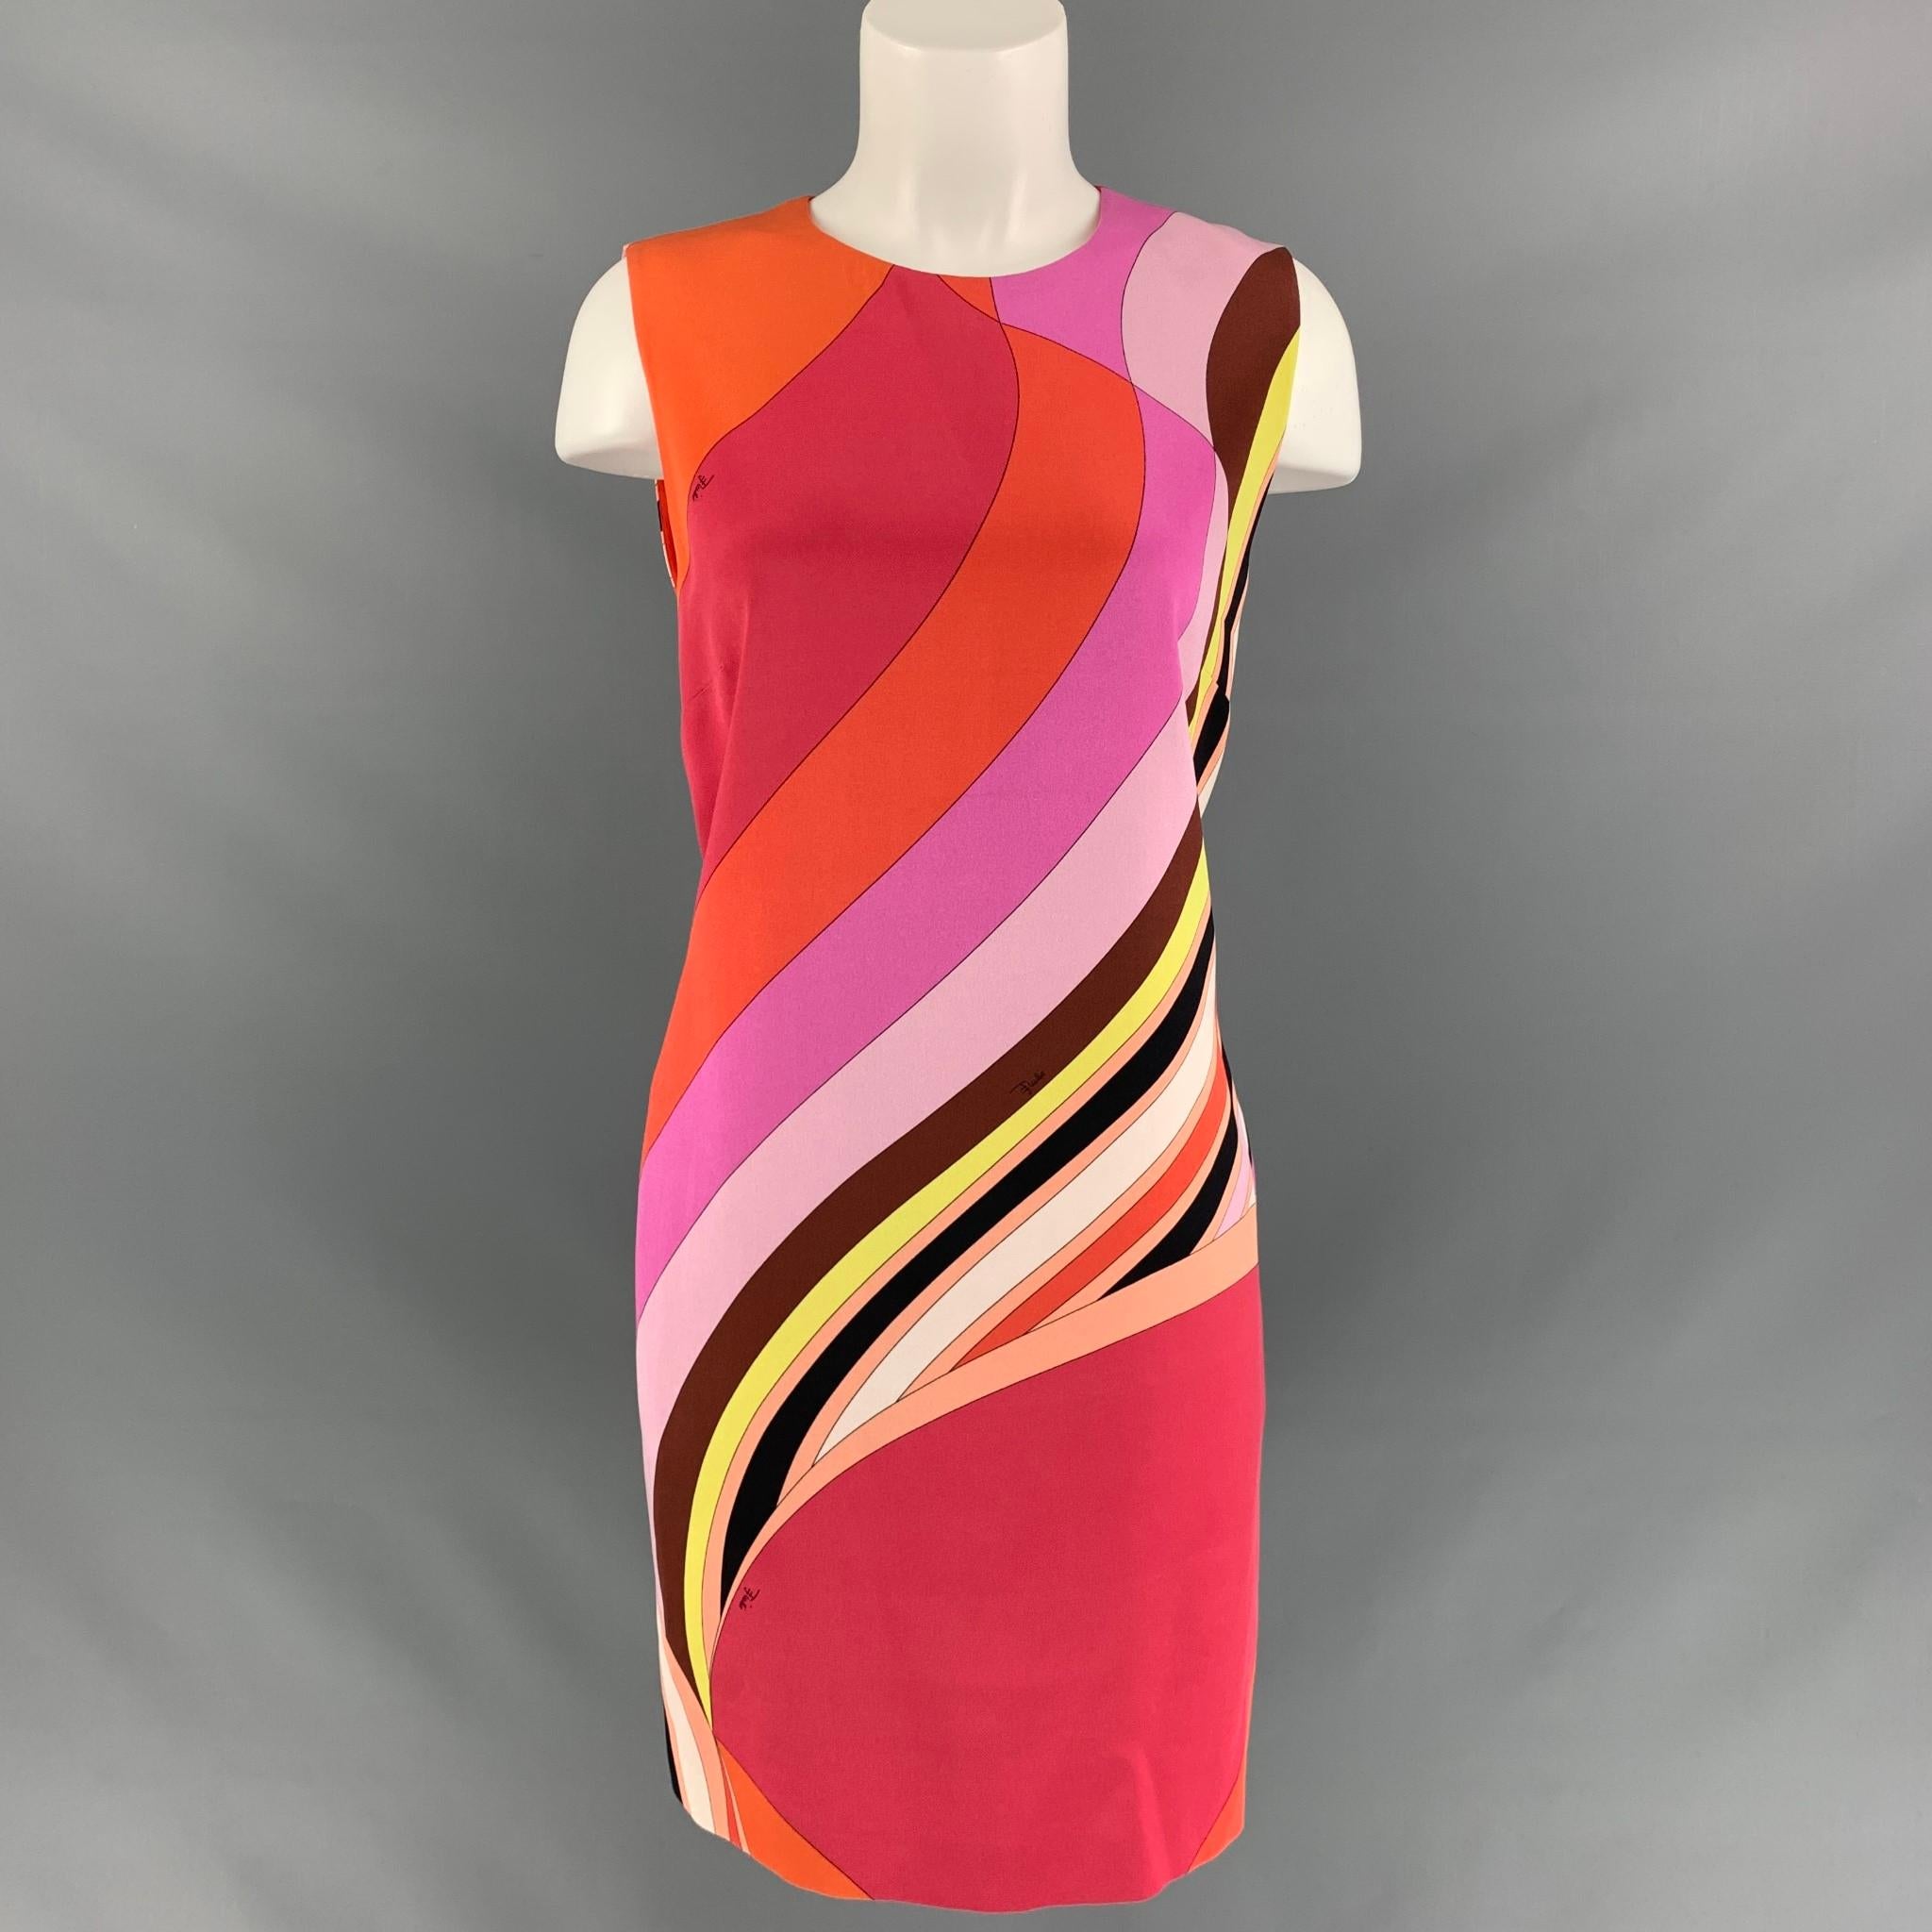 EMILIO PUCCI below knee cocktail dress comes in multi-color silk and full lined. Made in Italy.

Excellent Pre-Owned Condition.
Marked: 44 IT

Measurements:

Shoulder: 14 in
Bust: 40 in
Waist: 38 in
Hip: 40 in
Length: 34.5 in 

SKU: 112337
Category: